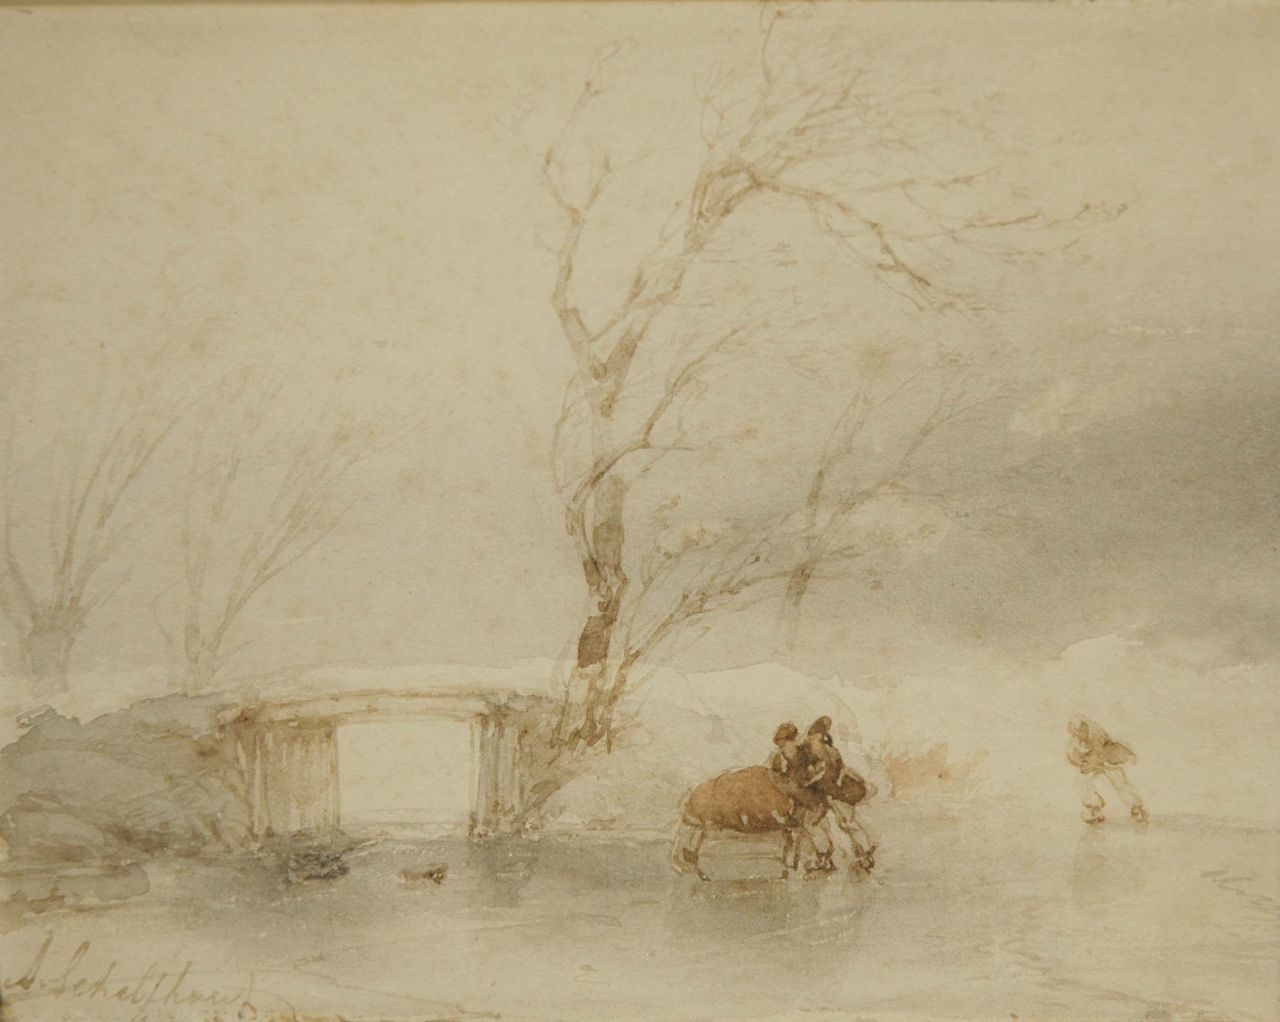 Schelfhout A.  | Andreas Schelfhout, A winter landscape with figures on the ice, Pinsel in grauer Tinte und Aquarell auf Papier 14,5 x 18,5 cm, signed l.l.